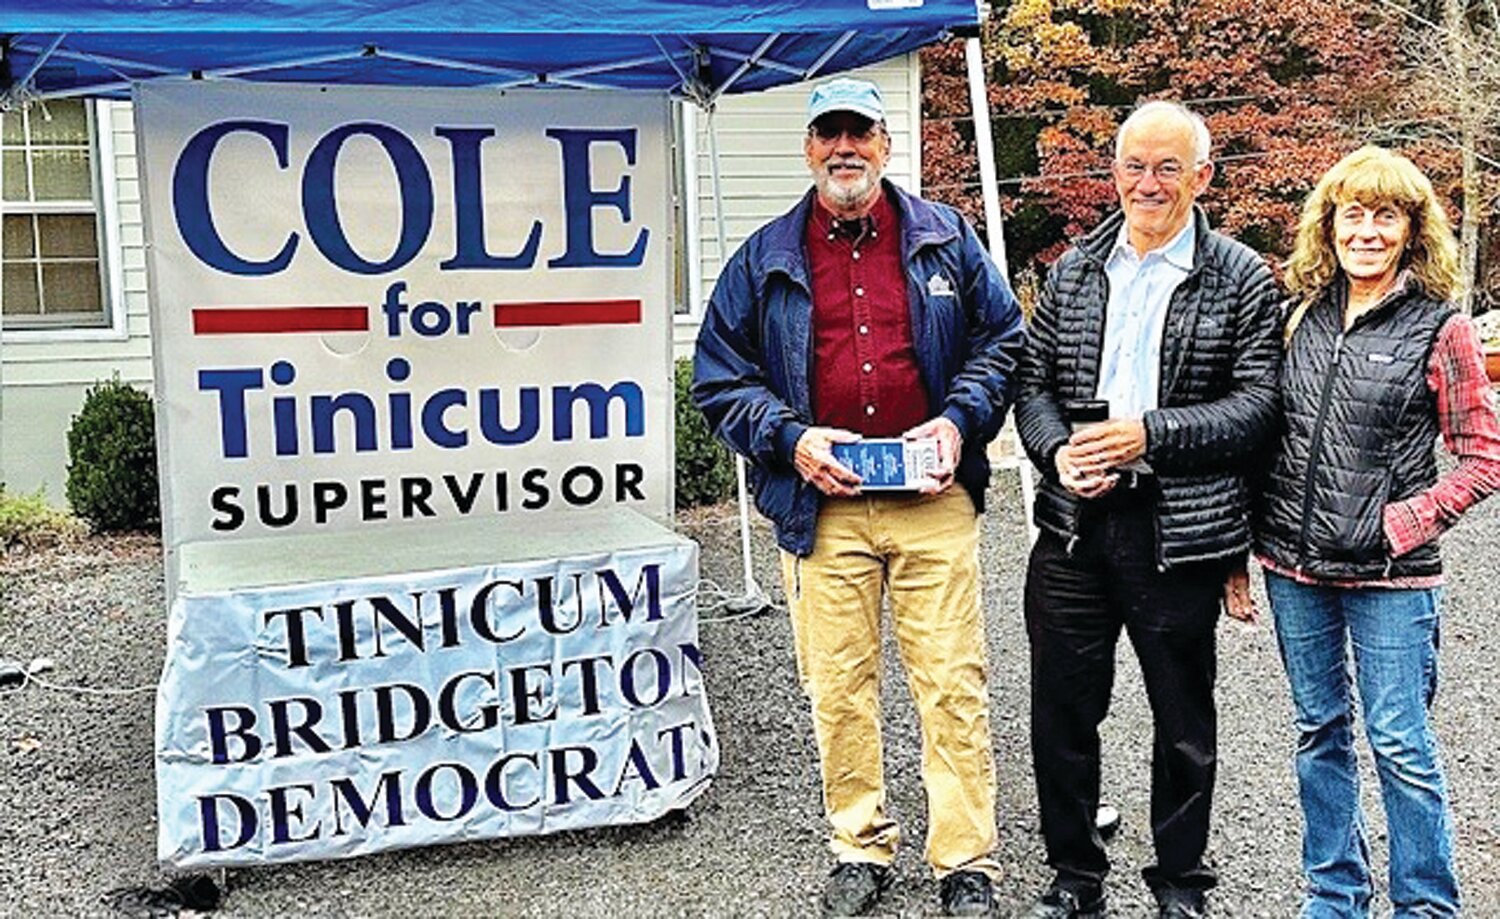 Tinicum supervisor-elect John Cole stands with supporters John Blake and Darlene Wright Blake near the polling station at the Tinicum Township Municipal Building on Election Day.